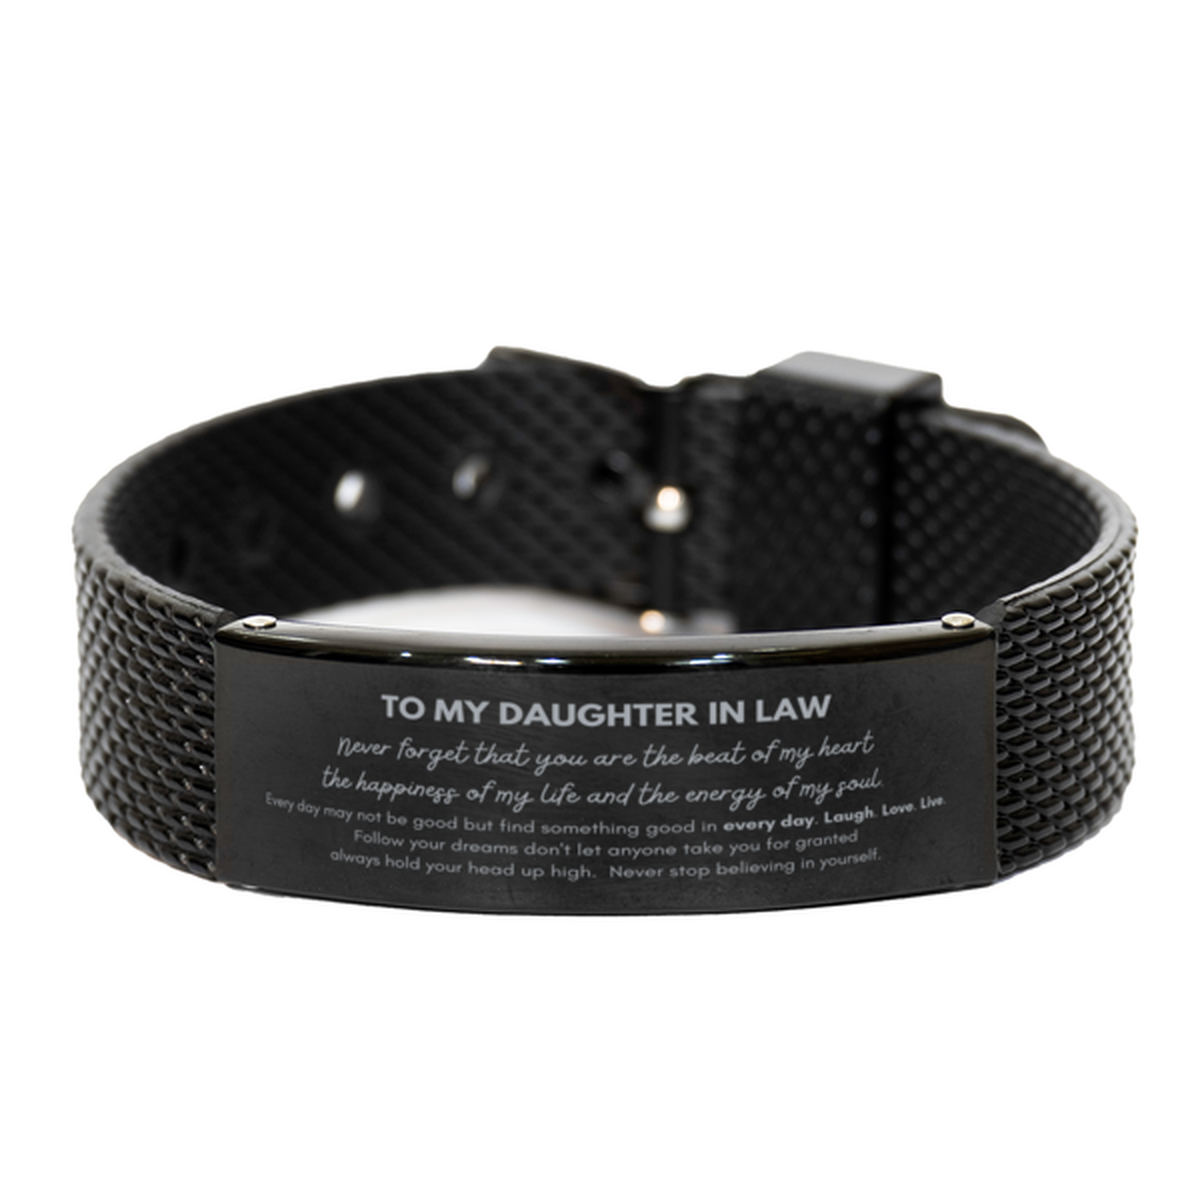 To My Daughter In Law Bracelet Gifts, Christmas Daughter In Law Black Shark Mesh Bracelet Present, Birthday Unique Motivational For Daughter In Law, To My Daughter In Law Never forget that you are the beat of my heart the happiness of my life and the ener